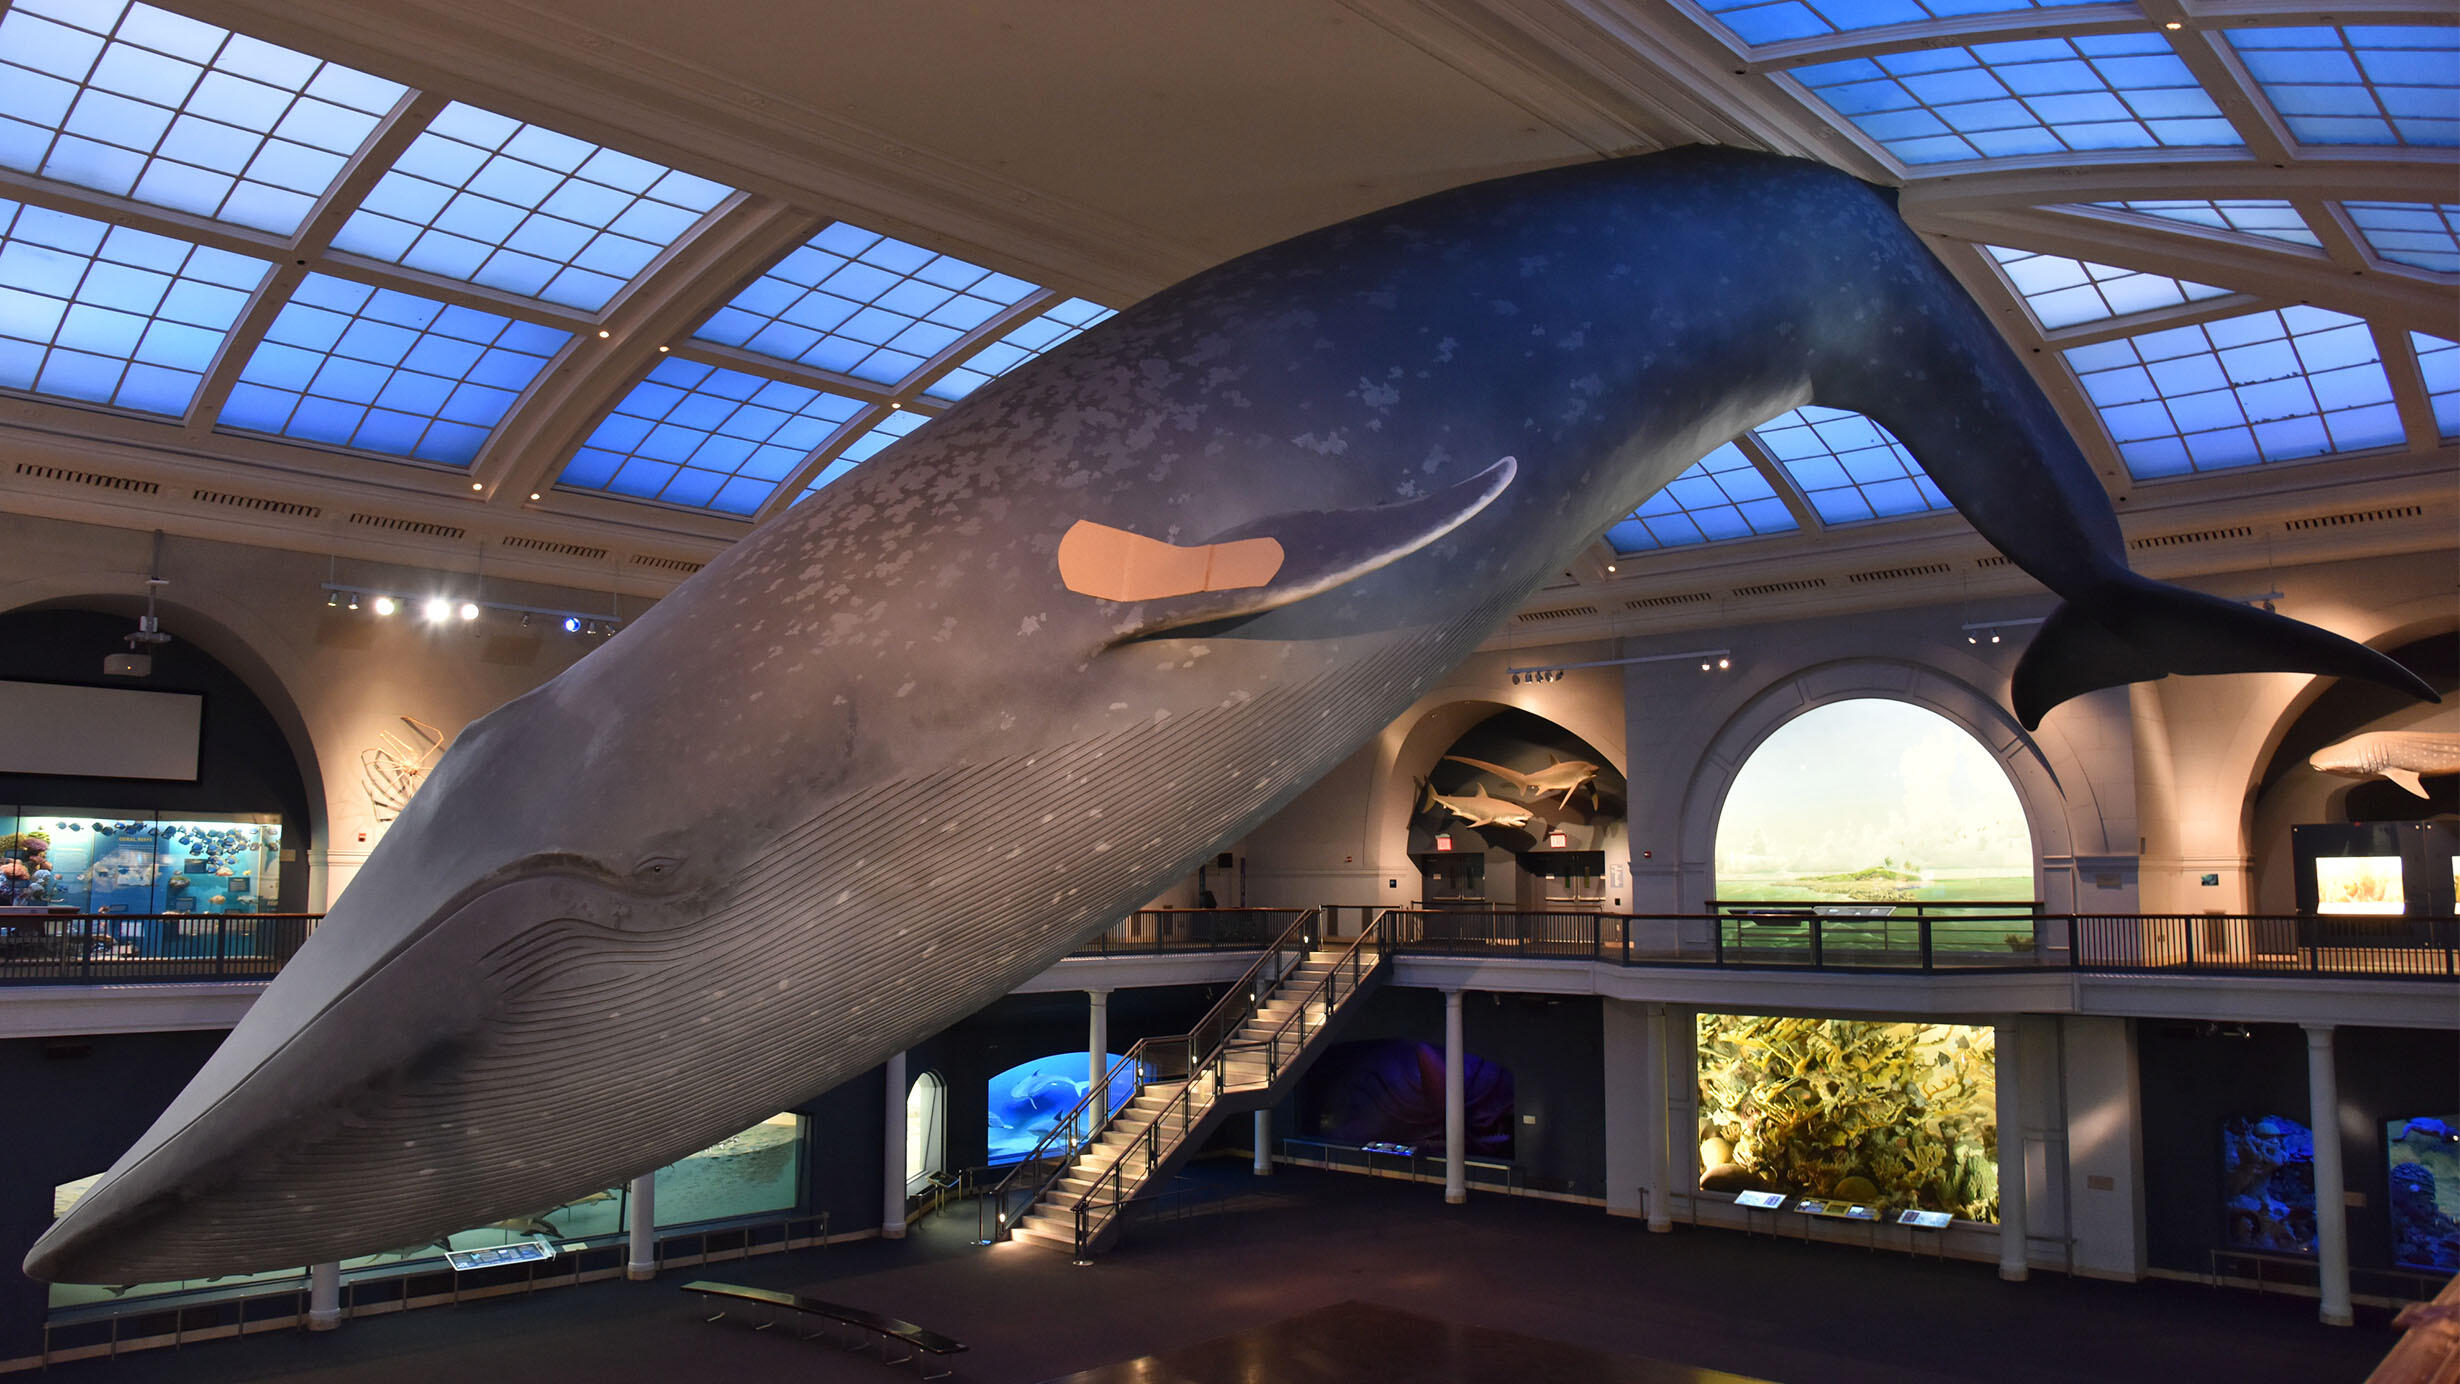 The iconic Blue Whale, suspended from the ceiling in the Hall of Ocean Life, sports a bandaid on its flipper.